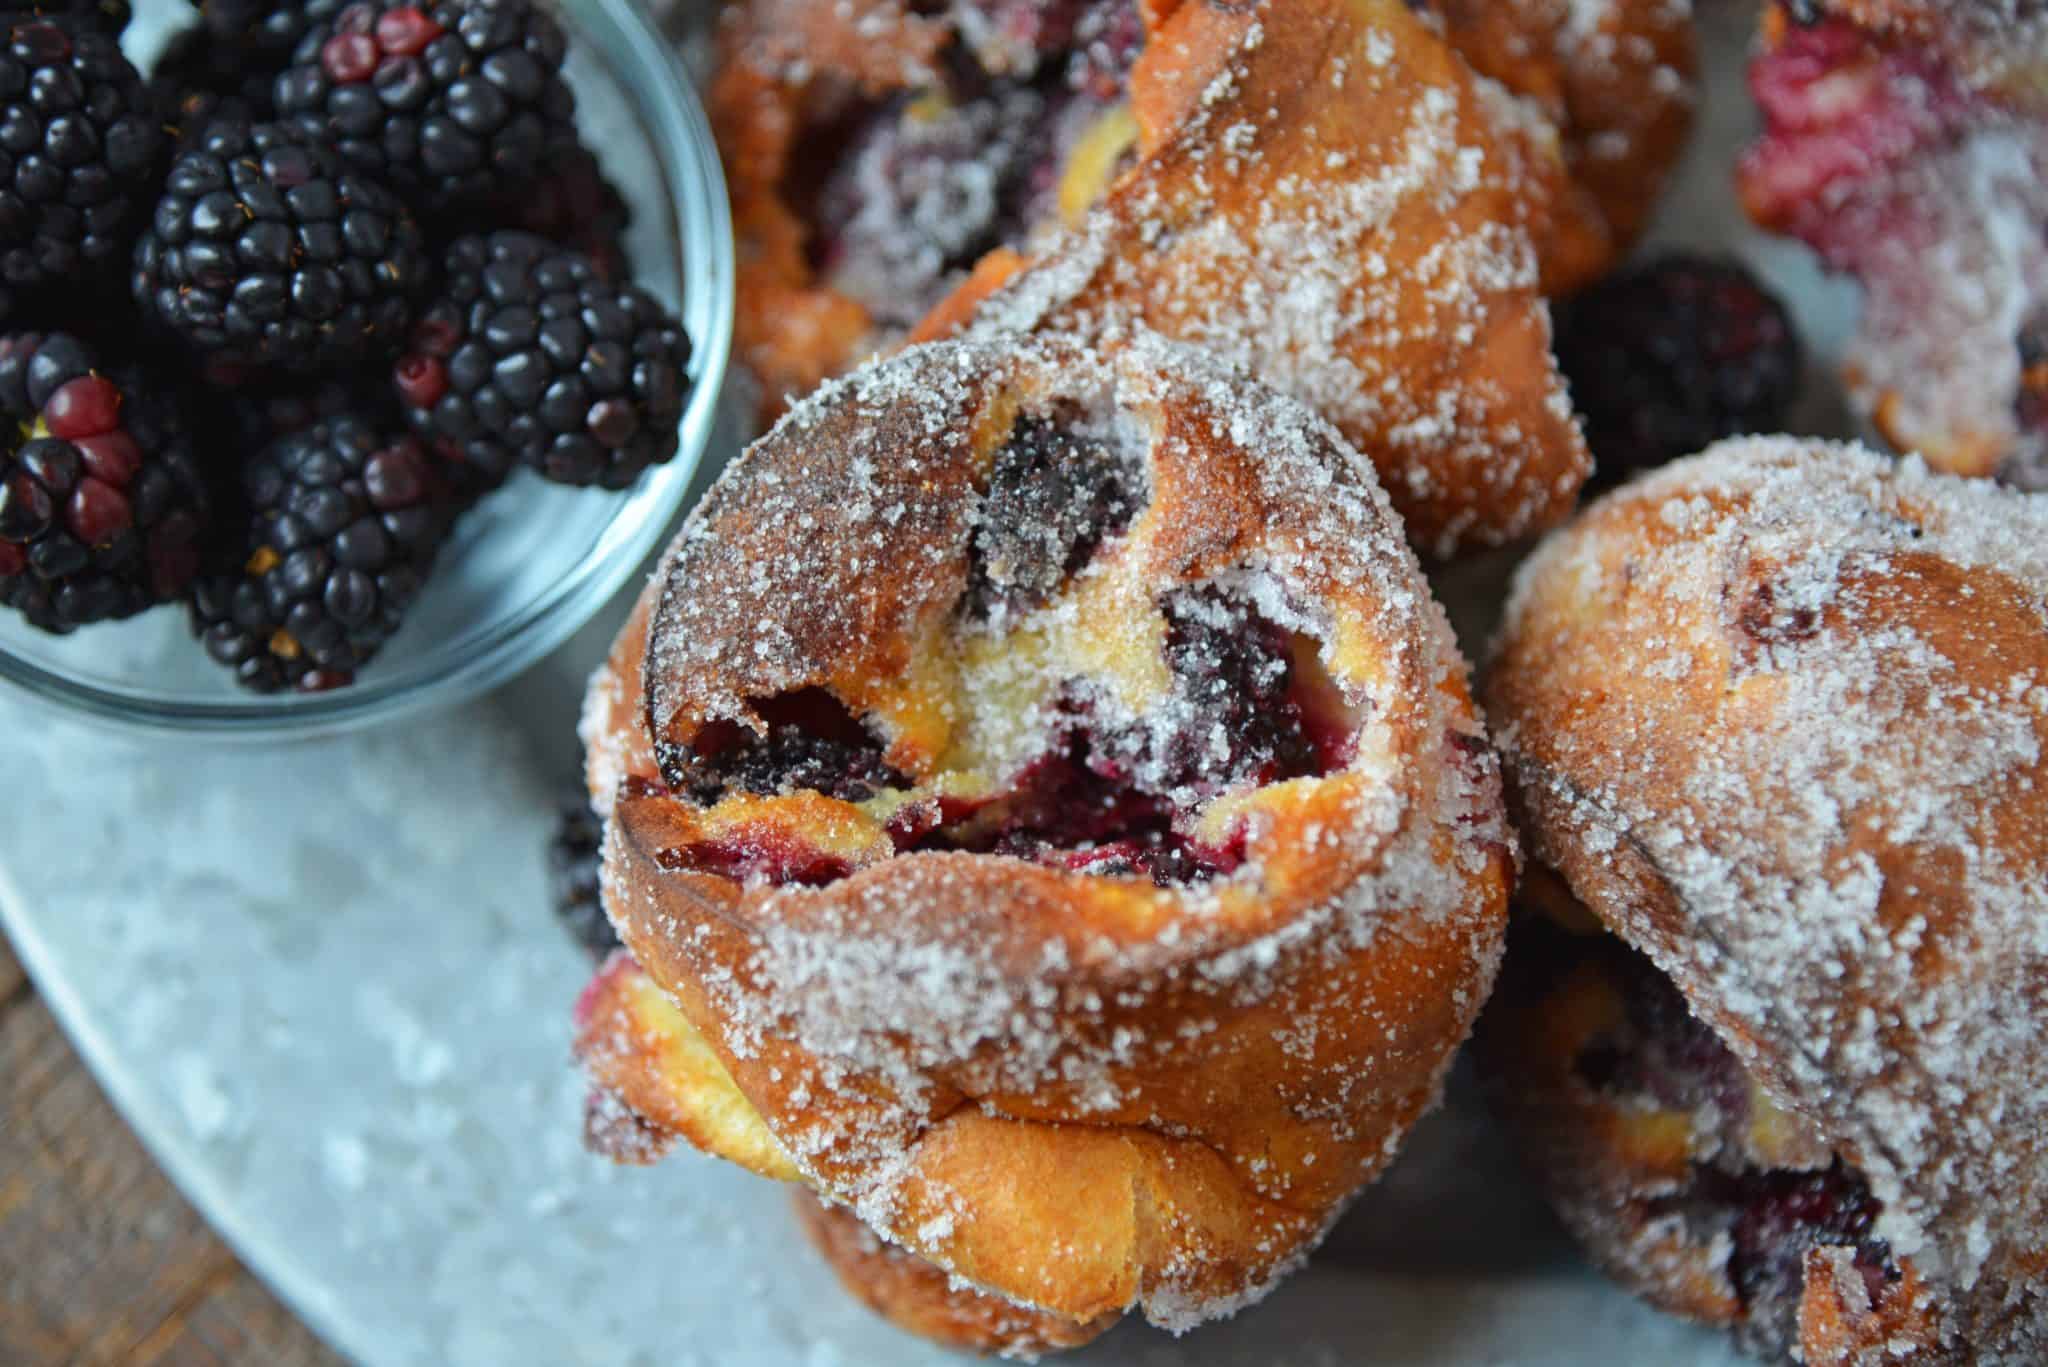 These Blackberry Popovers are a true melt-in-your-mouth breakfast treat, guaranteed to impress guests. Easier to make than you think, too! #popovers #popoverrecipe #bestpopovers www.savoryexperiments.com